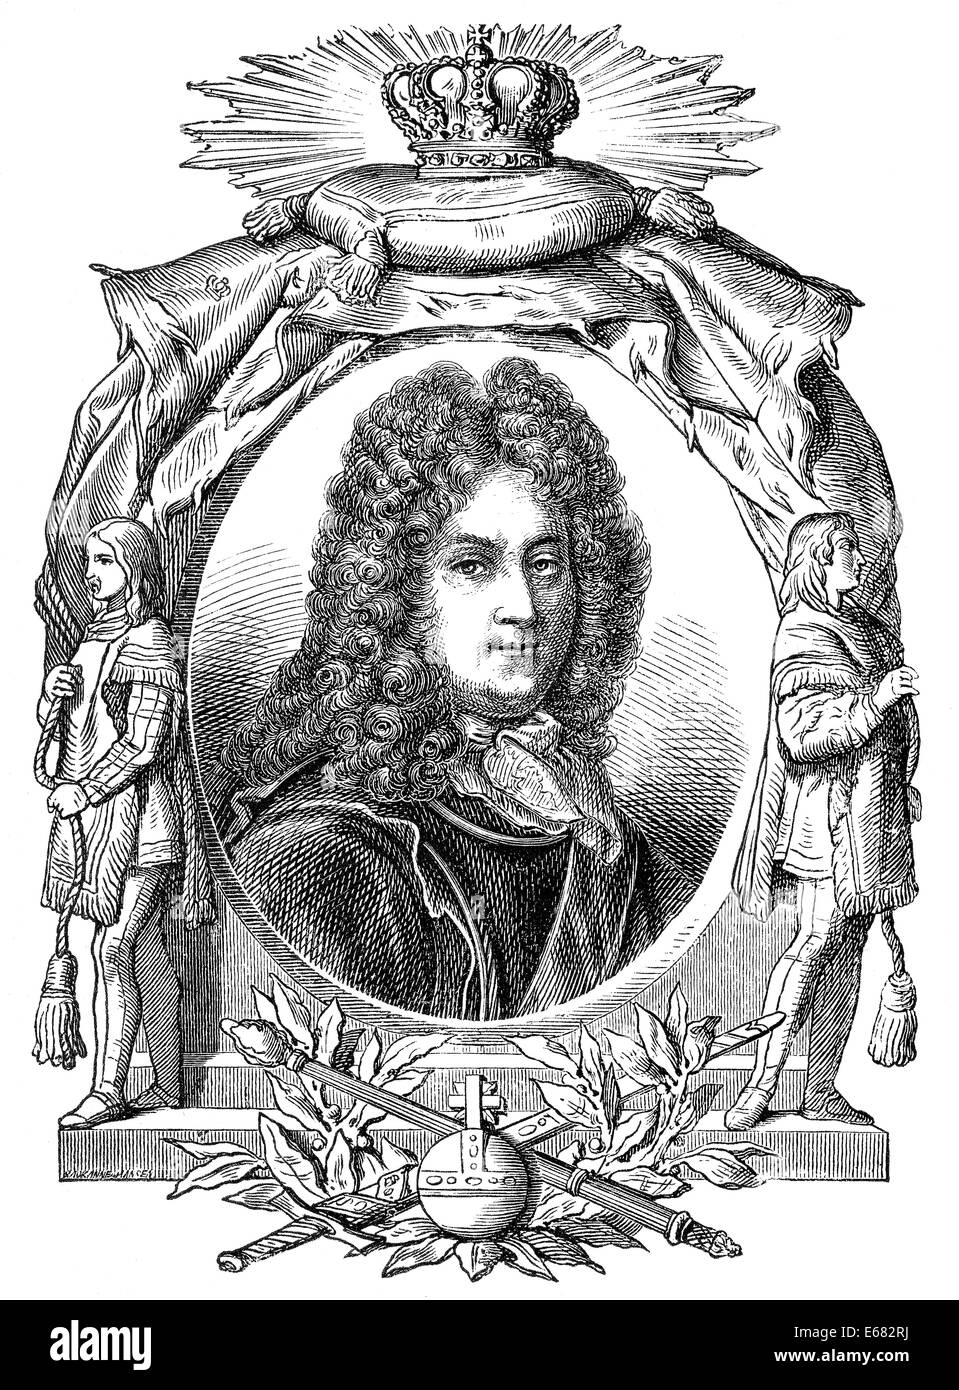 portrait of Louis XIV, Louis le Grand, 1638 - 1715, King of France and Navarre, called the Sun King or le Roi-Soleil, Ludwig XIV Stock Photo